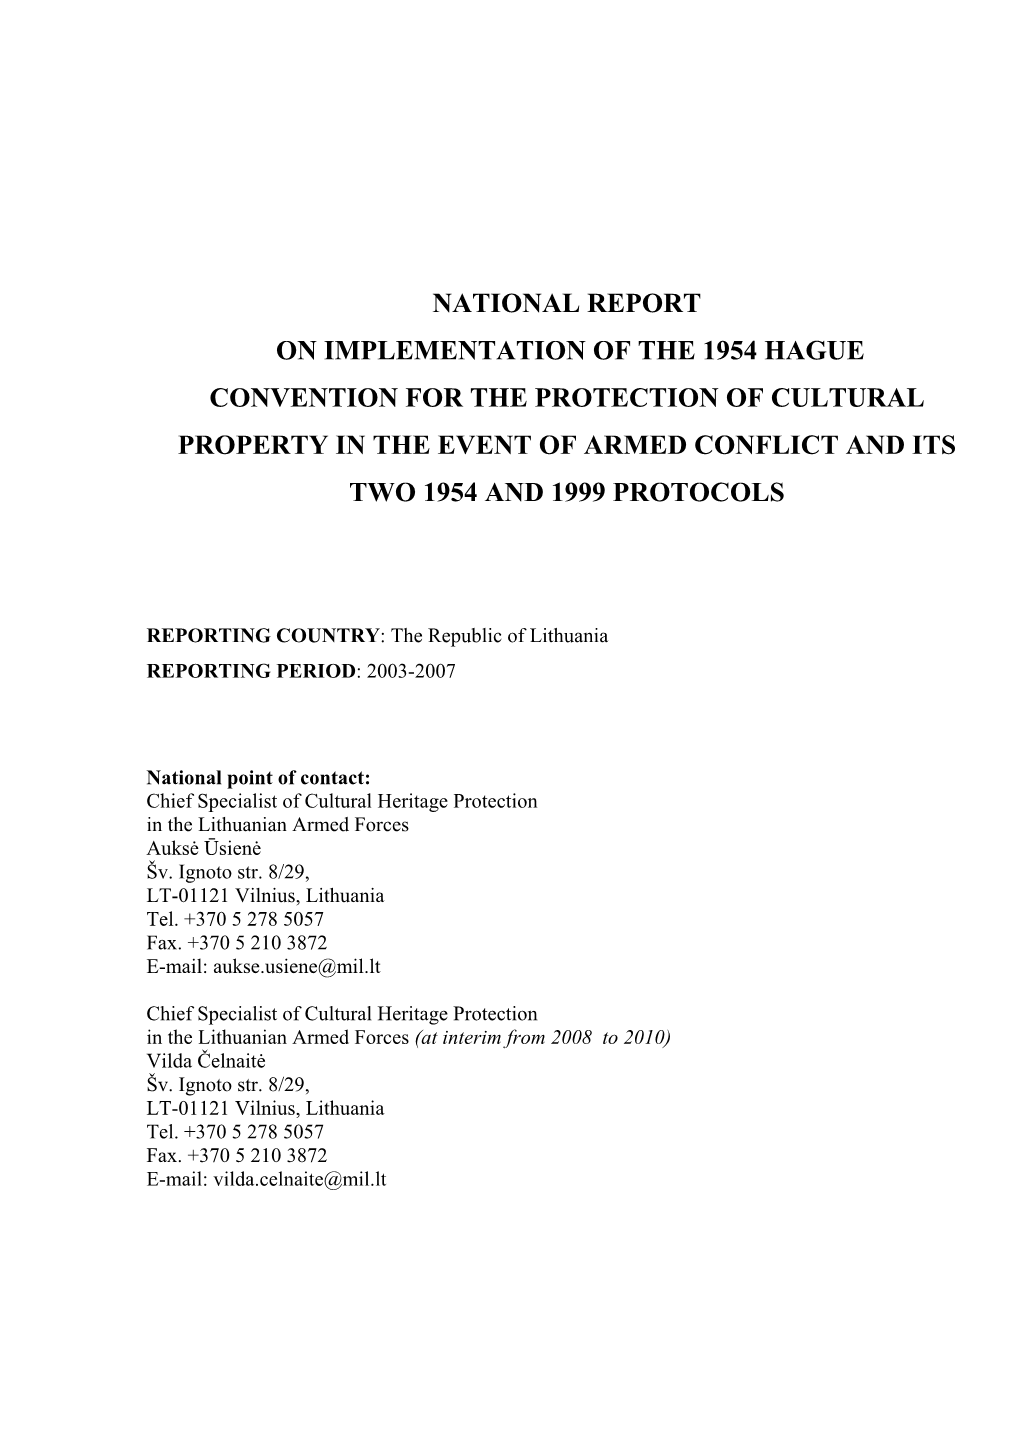 National Report on Implementation of the 1954